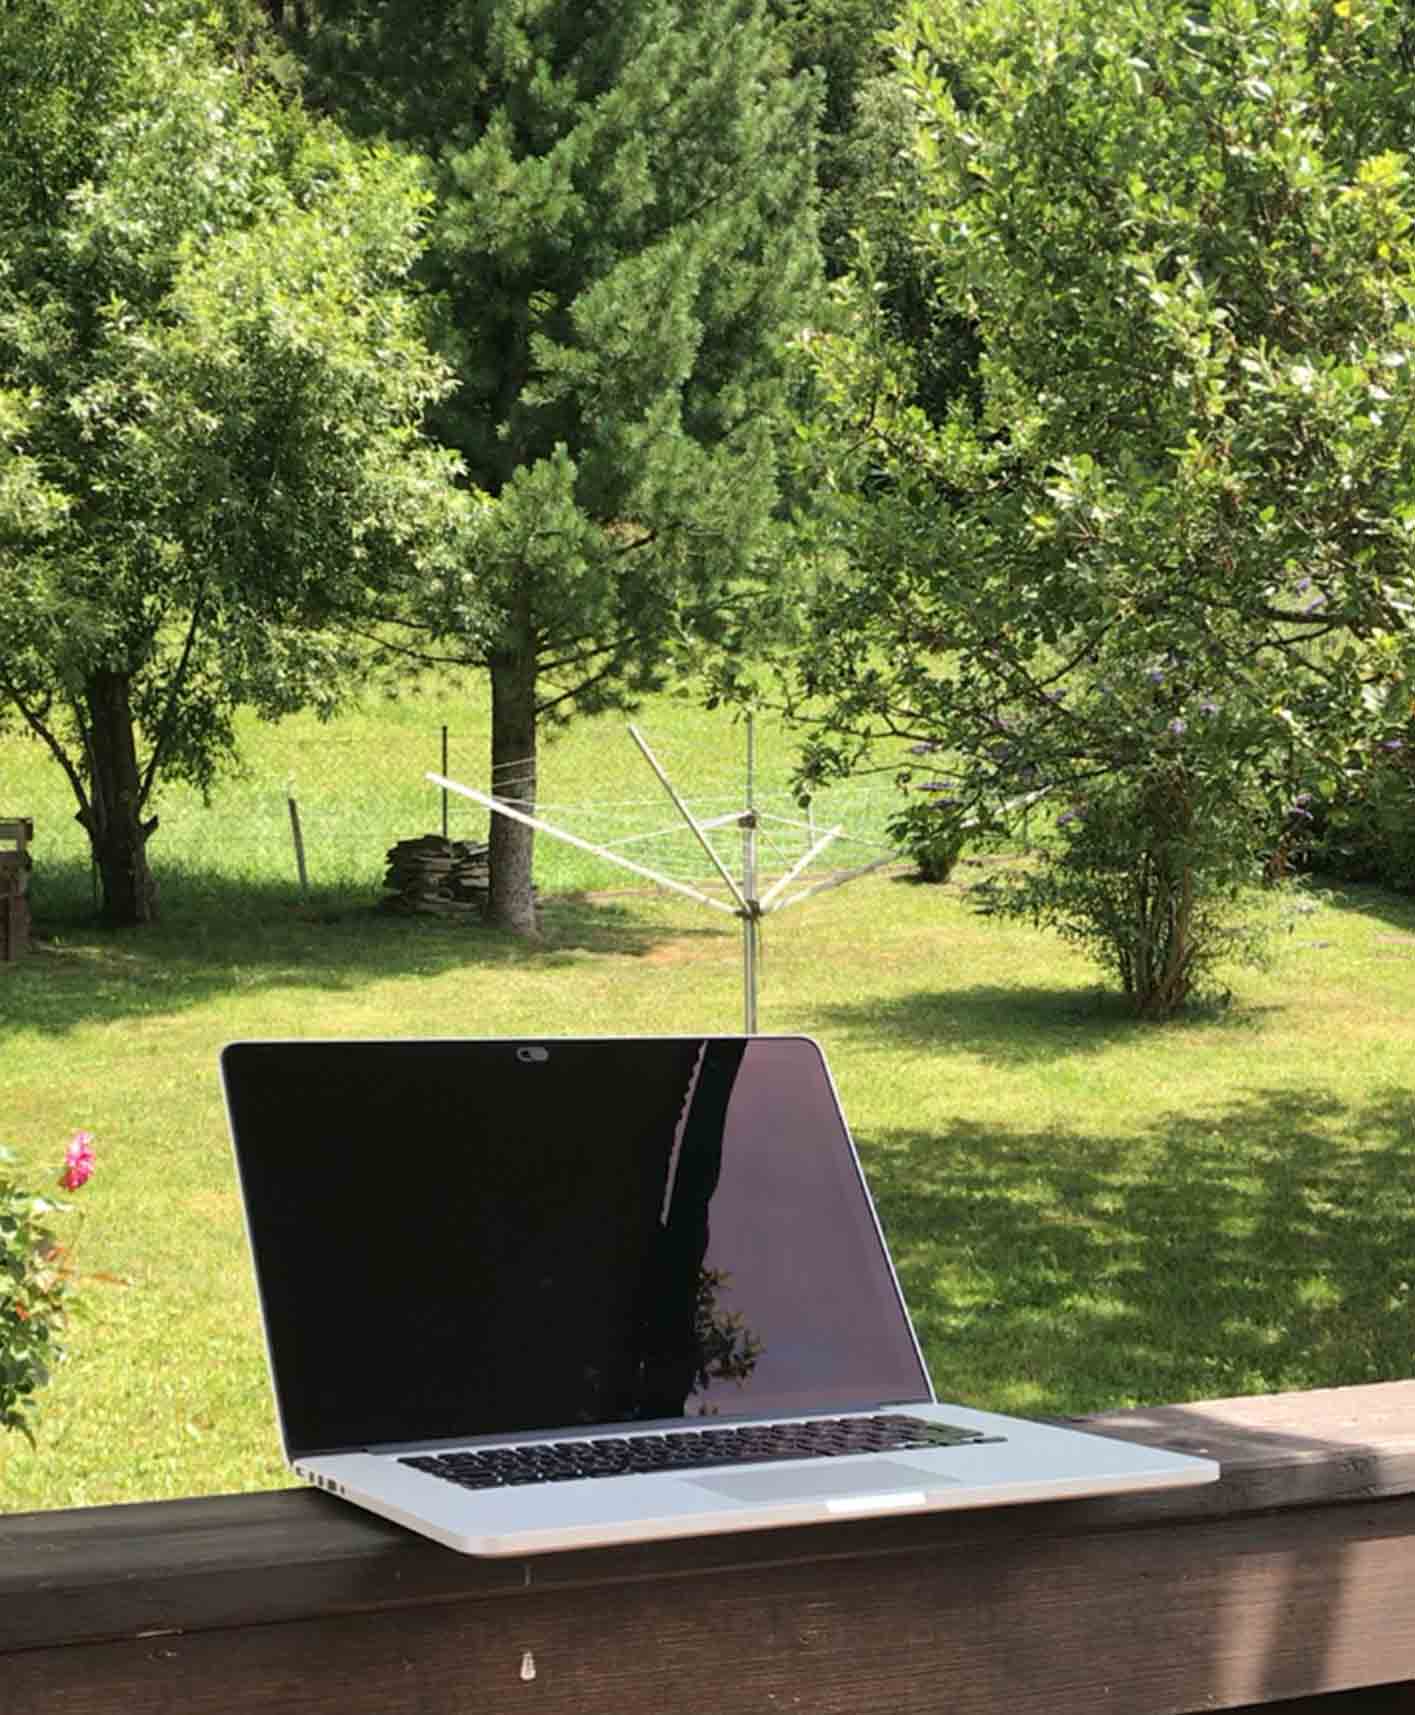 An open laptop standing on a balcony overlooking a green garden scene with trees and grass in Austria.